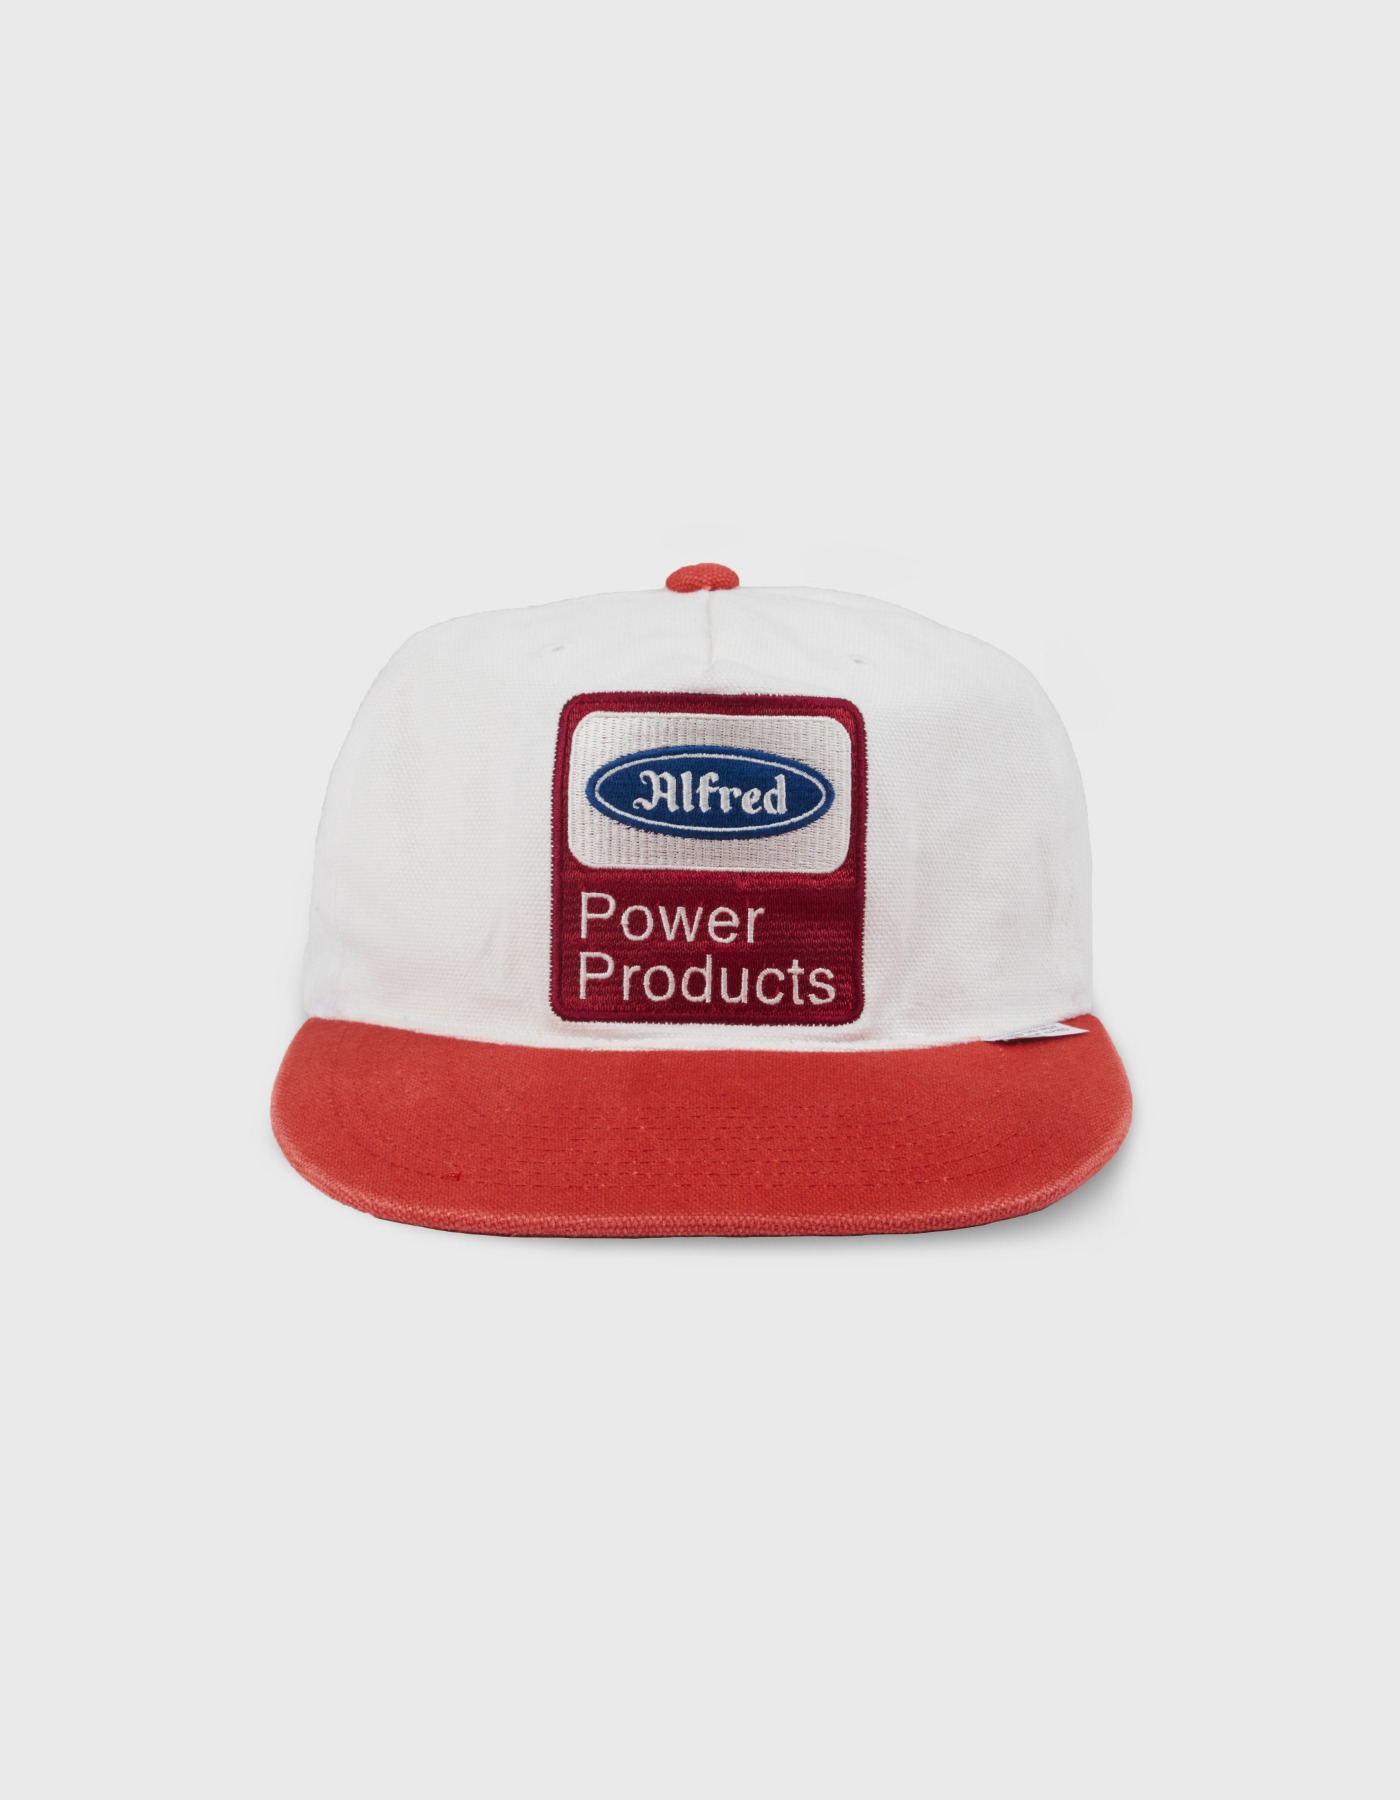 FRED POWER PRODUCTS CAP / White-Maroon